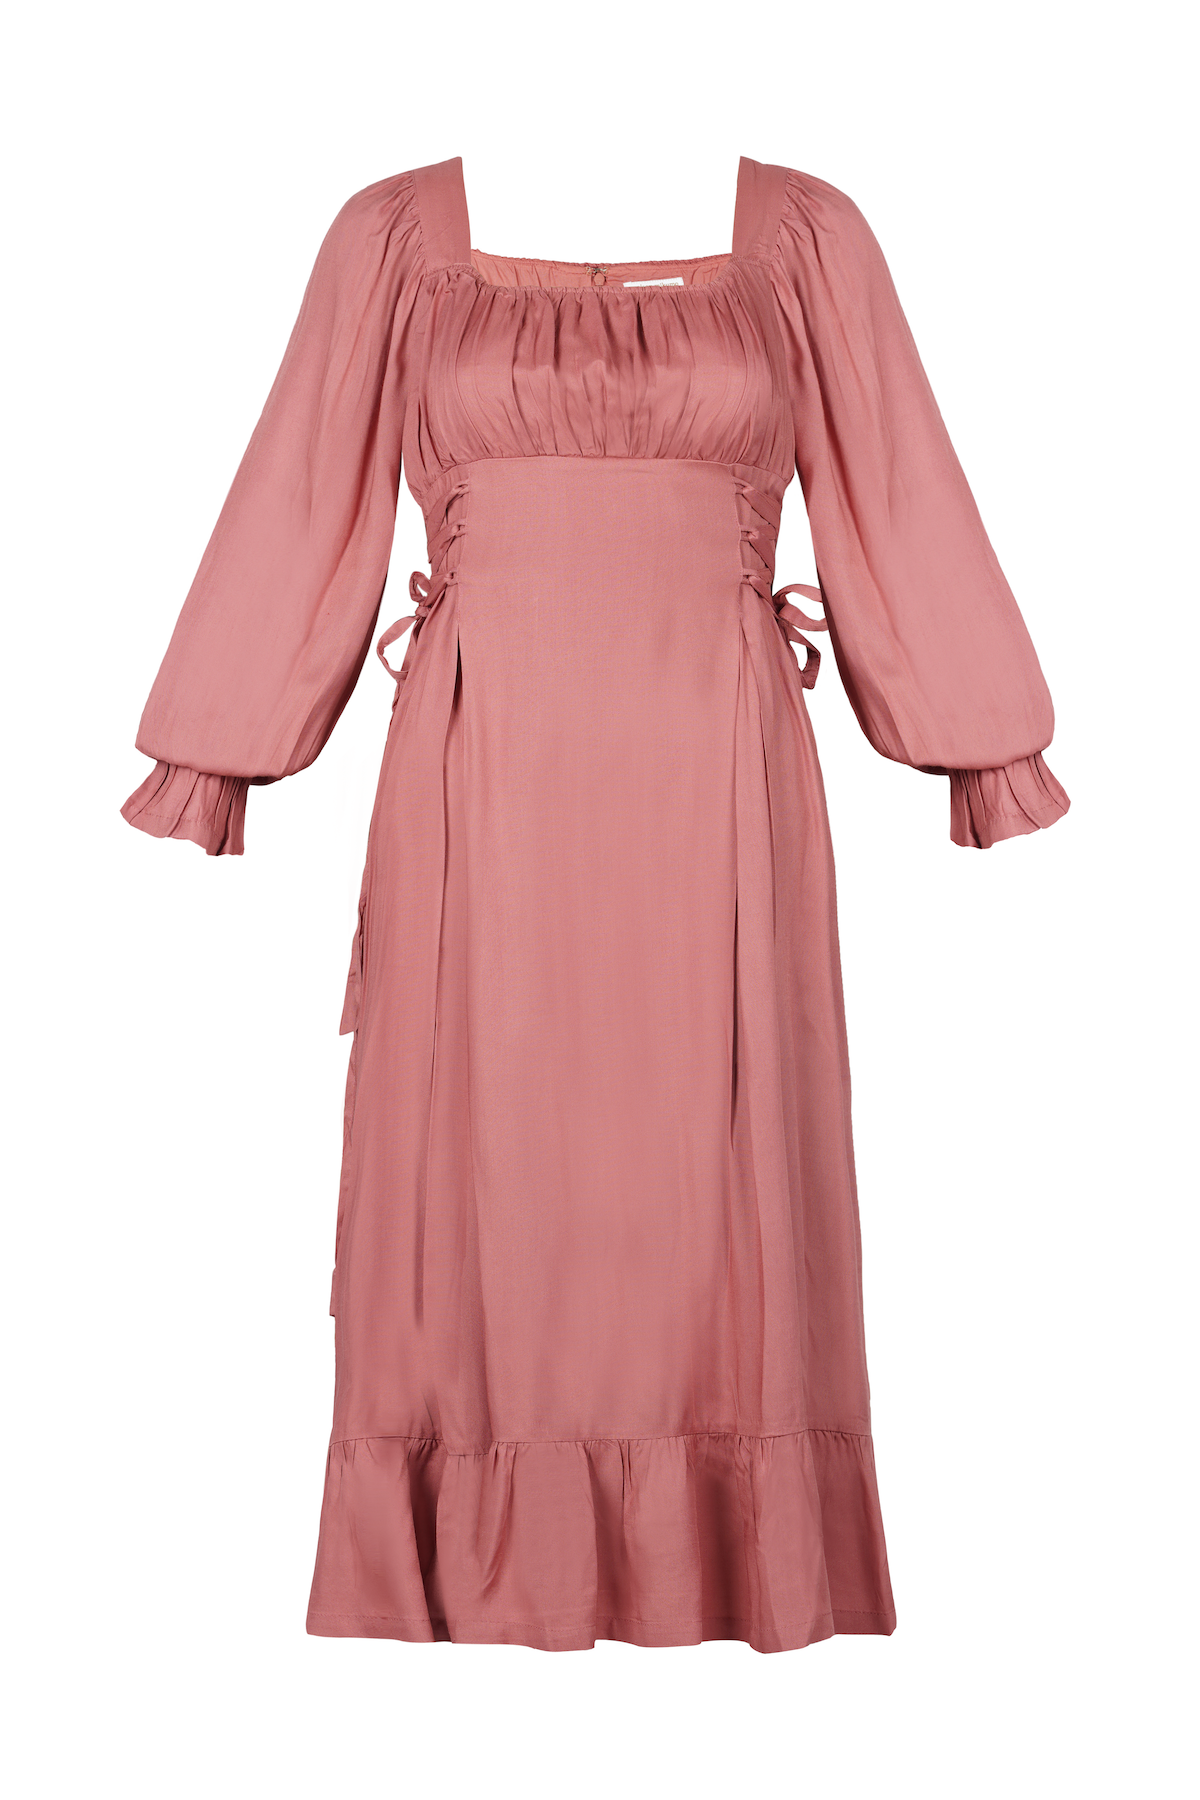 The Clarice Dress in Rose